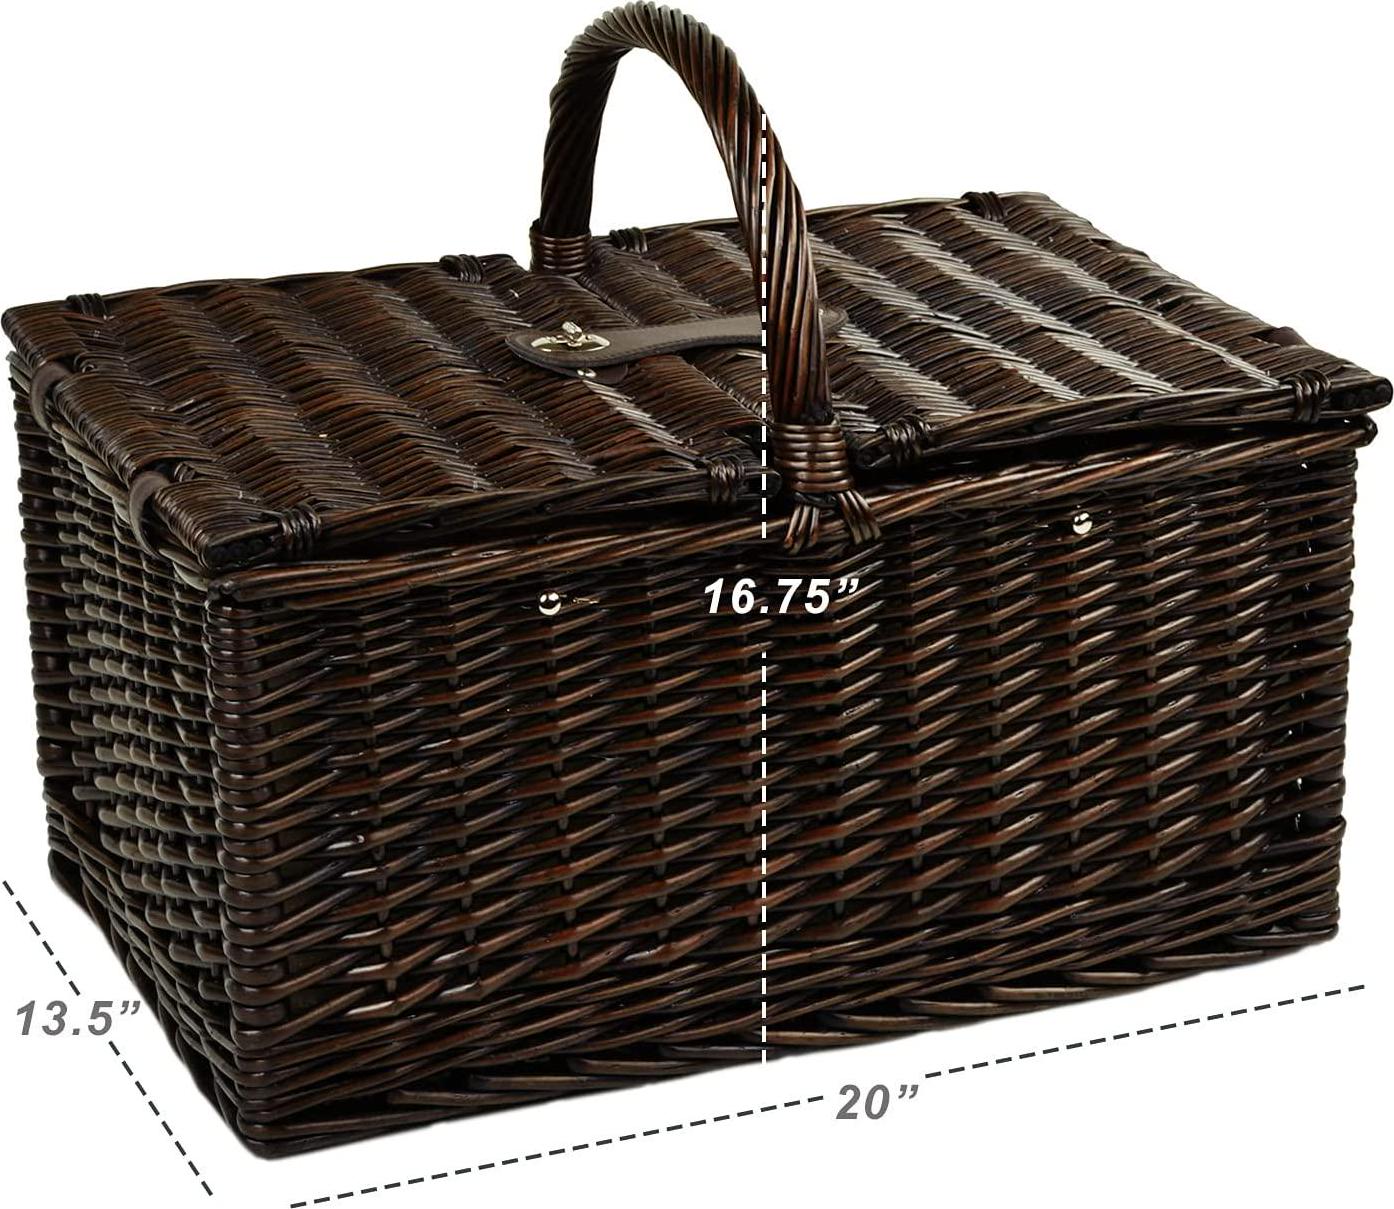 Picnic at Ascot Buckingham Willow Picnic Basket with Service for 4 - London Plaid